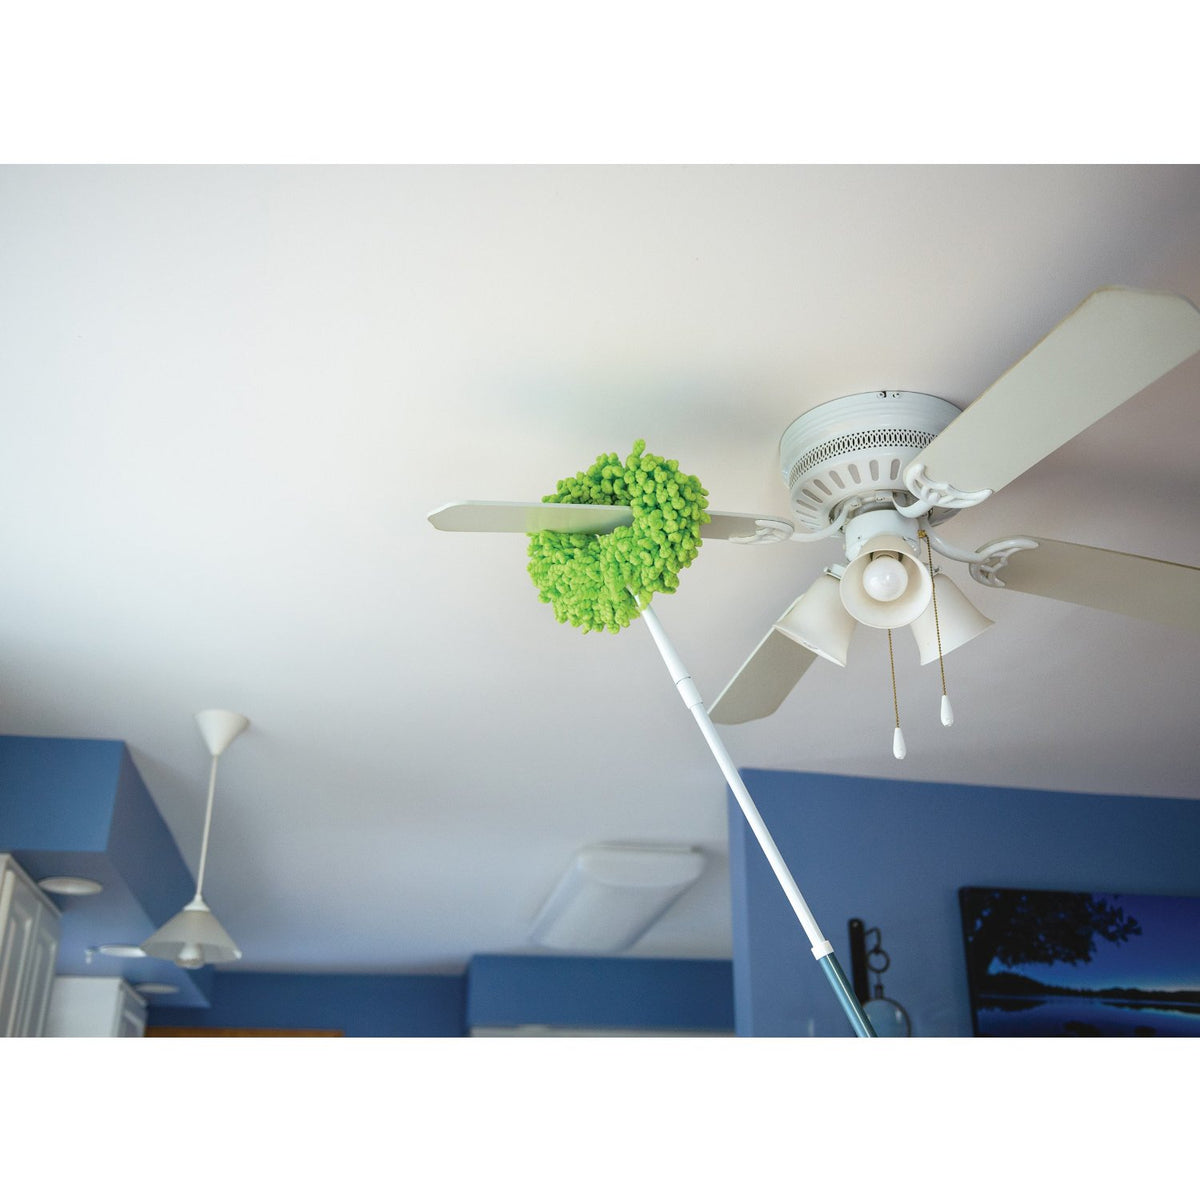 Buy quickie fan duster - Online store for cleaning supplies, dusters & accessories in USA, on sale, low price, discount deals, coupon code